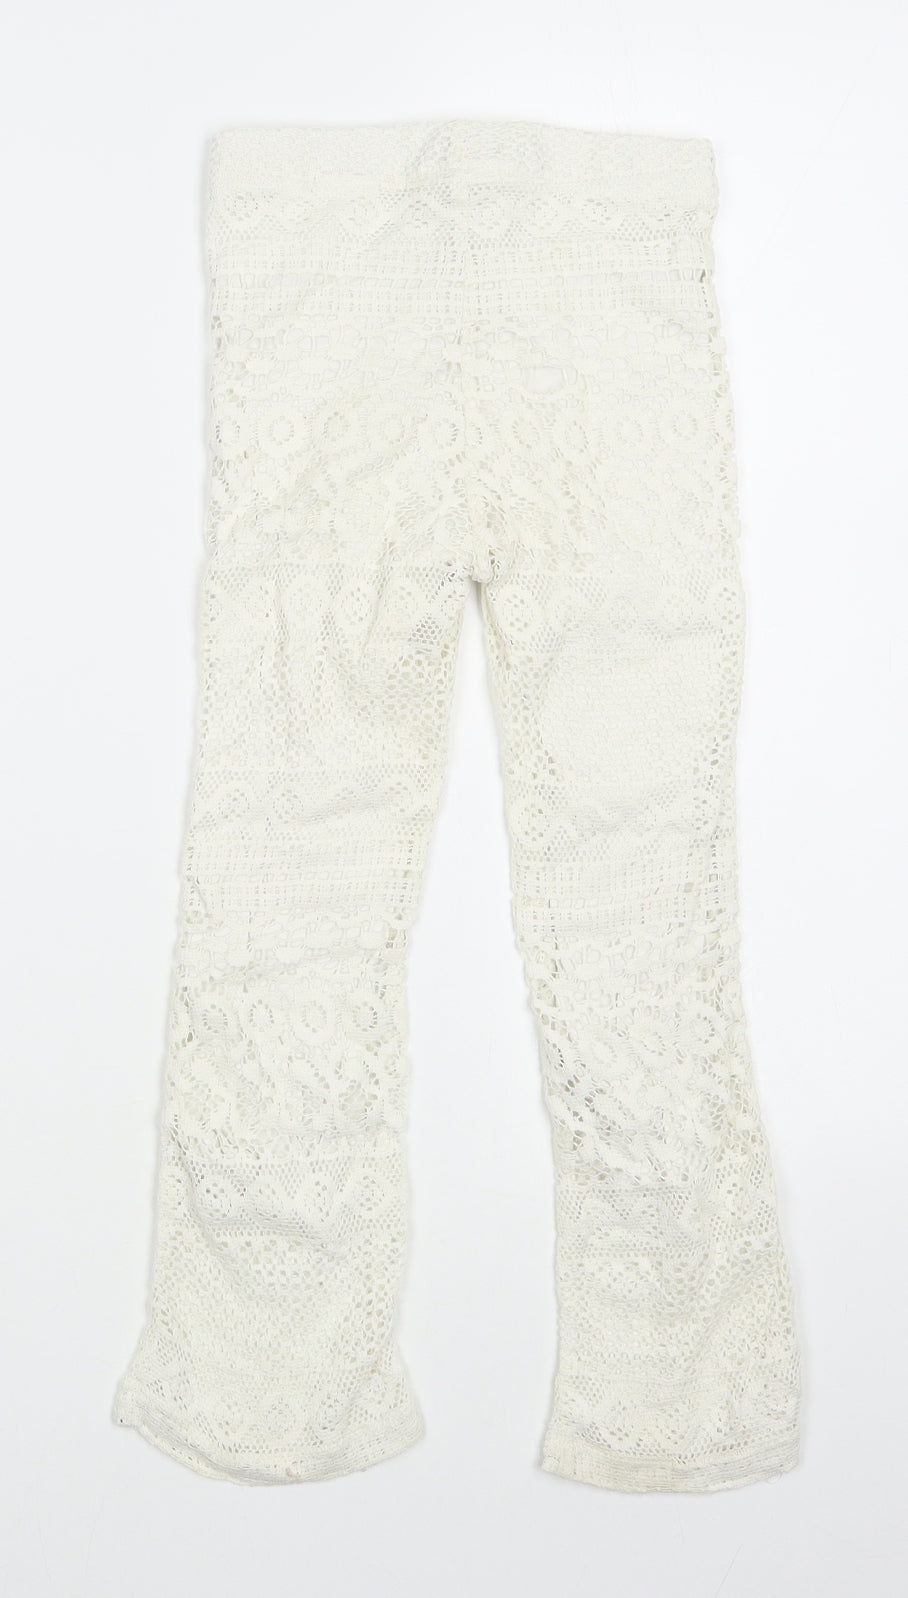 H&M Girls White  Cotton Jogger Trousers Size 3-4 Years  Regular